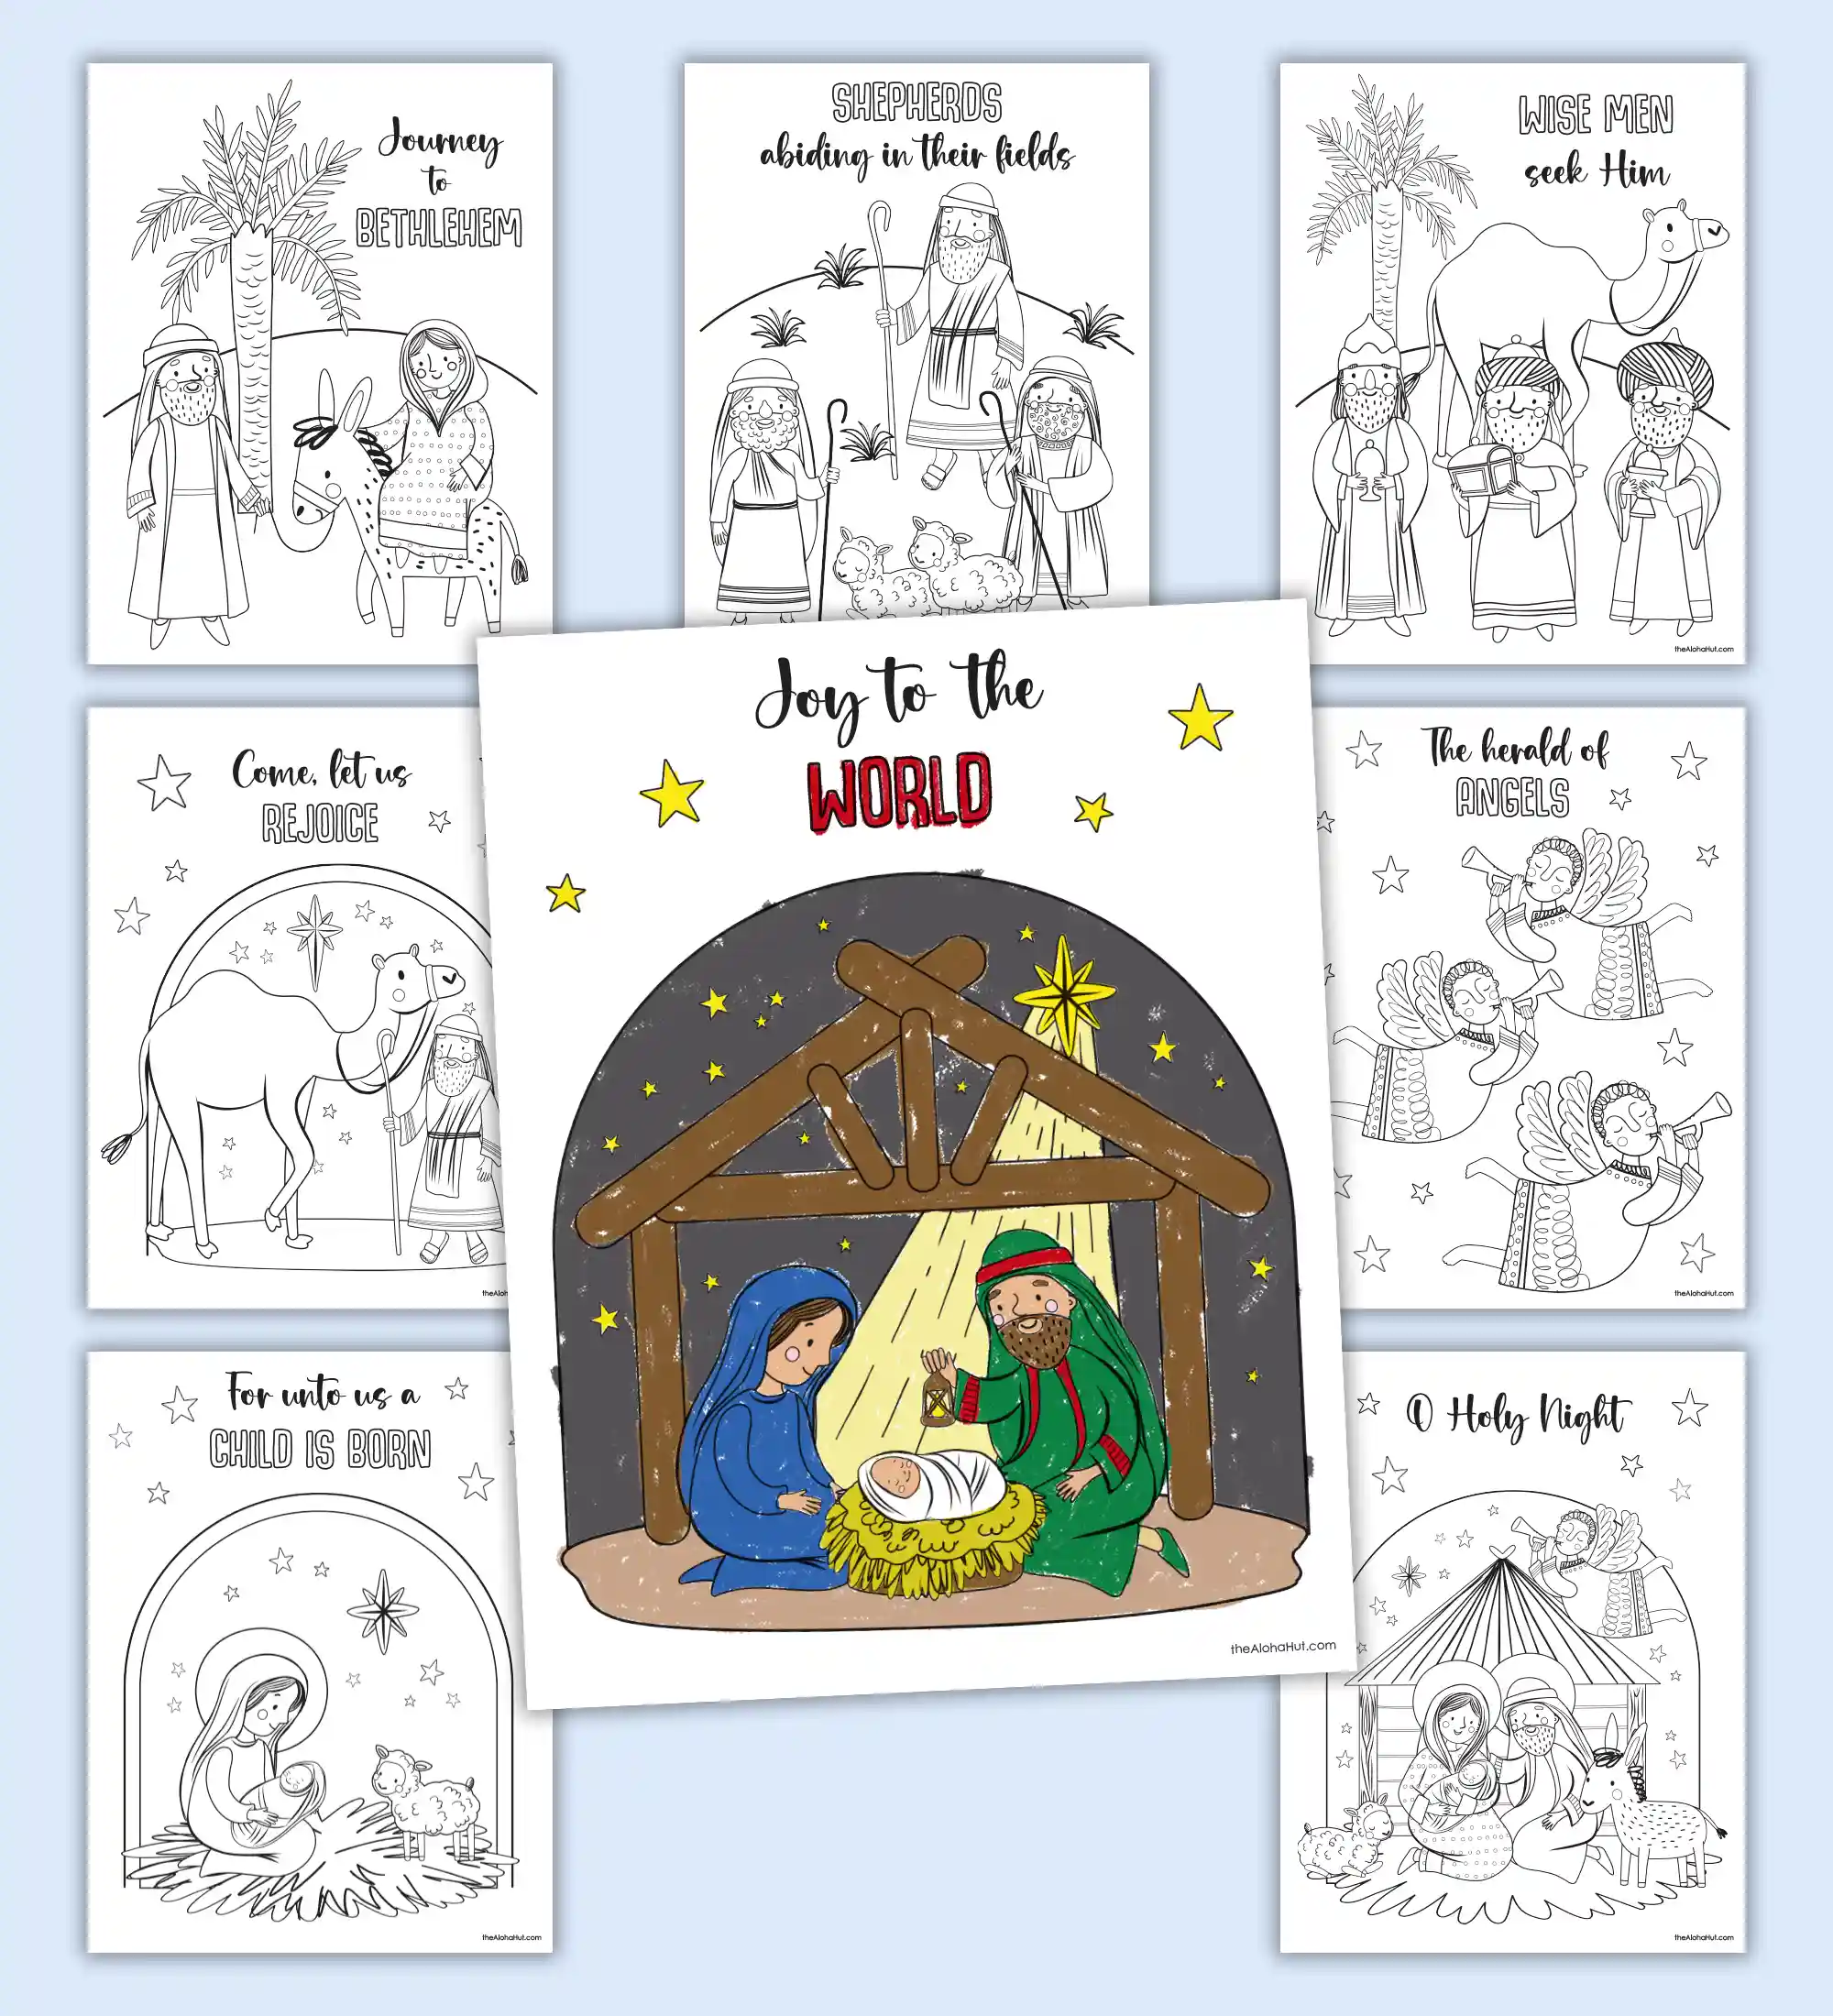 Nativity coloring pages for Christmas. Download the printable coloring pages to go along with the nativity story. There are 8 coloring pages of Mary, Joseph, baby Jesus, the shepherds, the wisemen, and the angels.